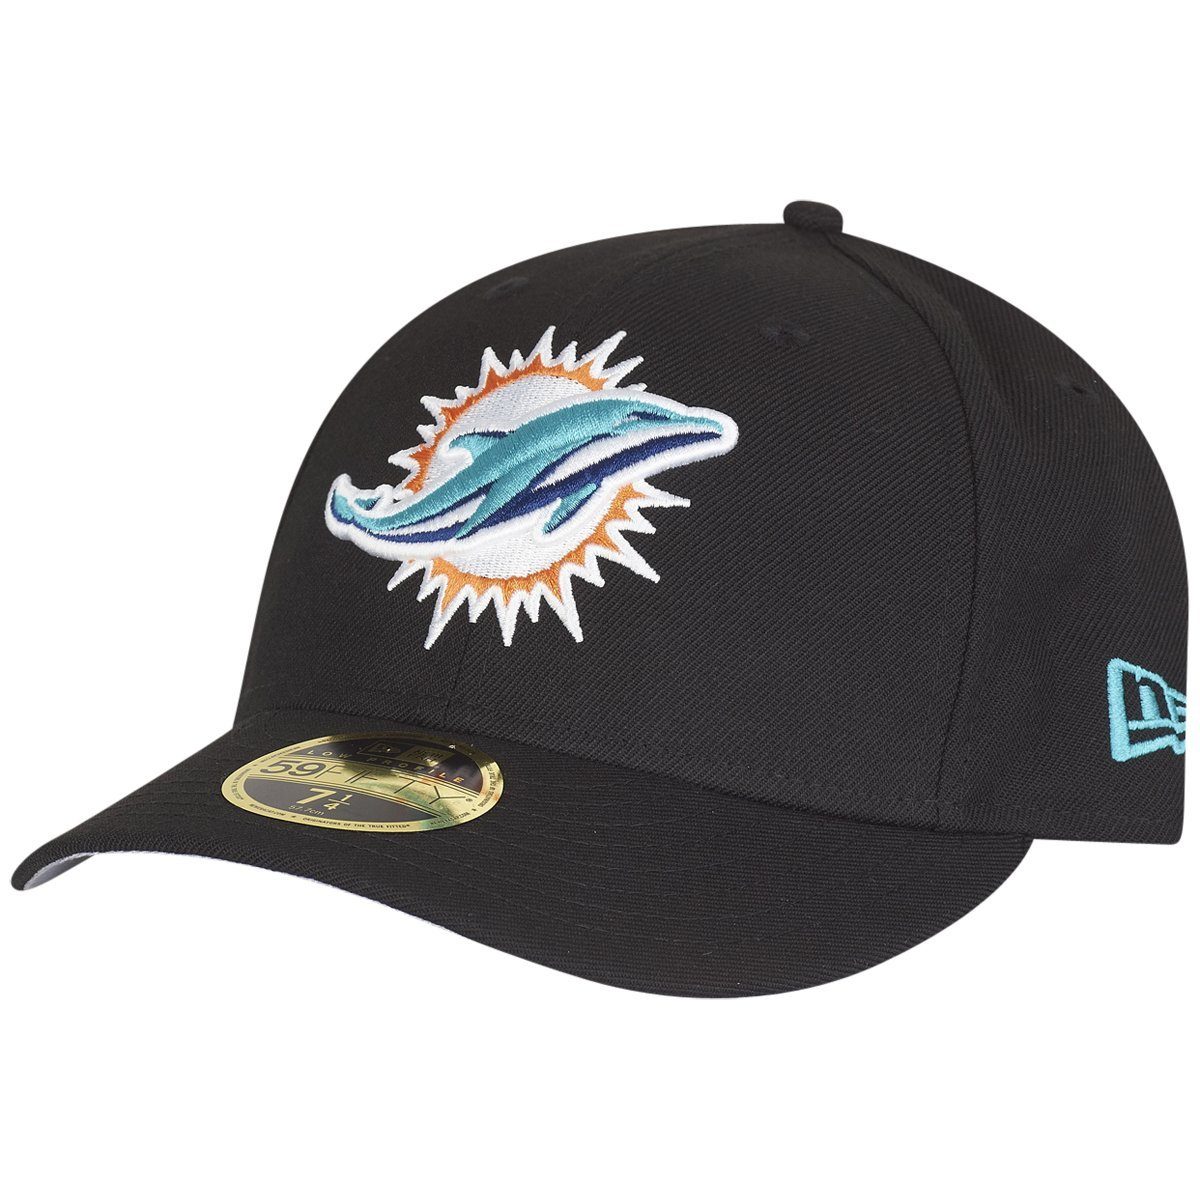 LOW Era Fitted Miami 59Fifty Cap PROFILE New Dolphins